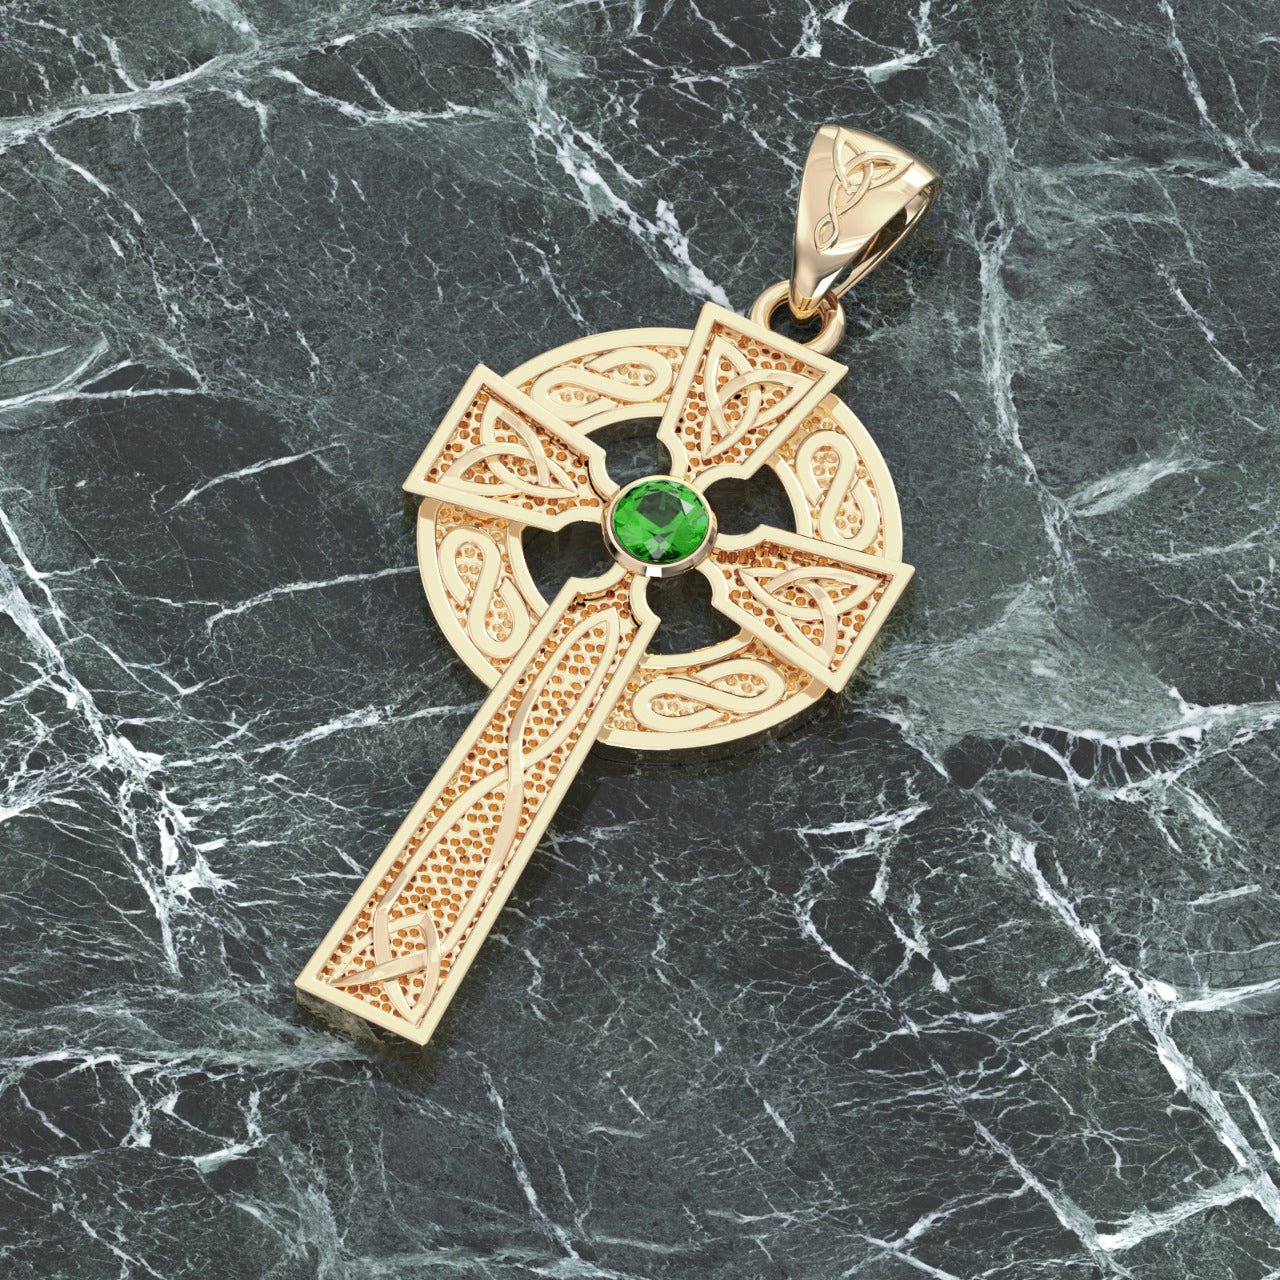 Men's Celtic Knot Cross Pendant Necklace with 15 Birthstones, 39mm - US Jewels